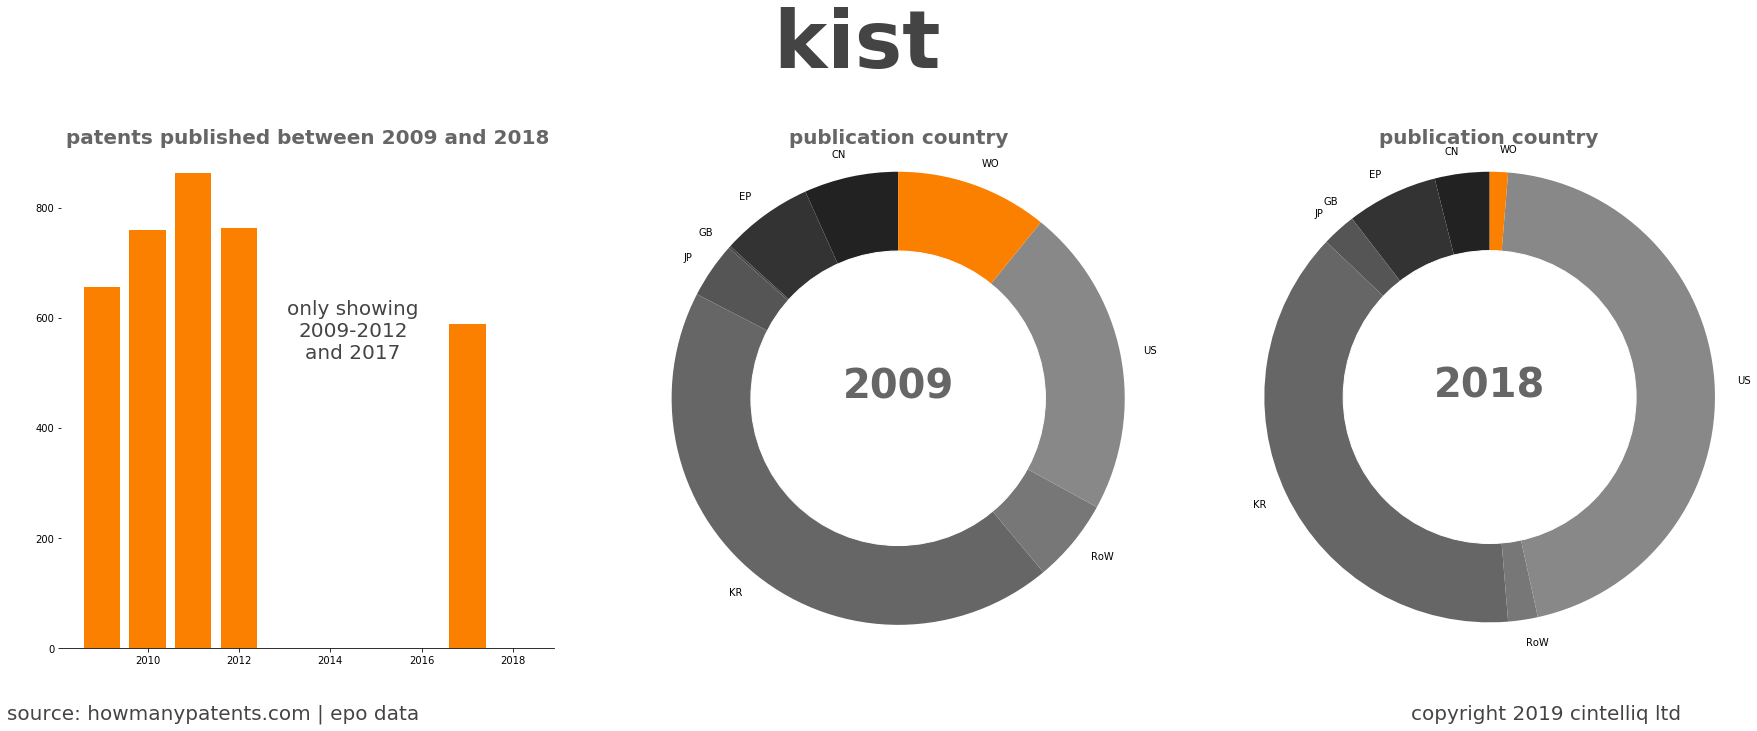 summary of patents for Kist 